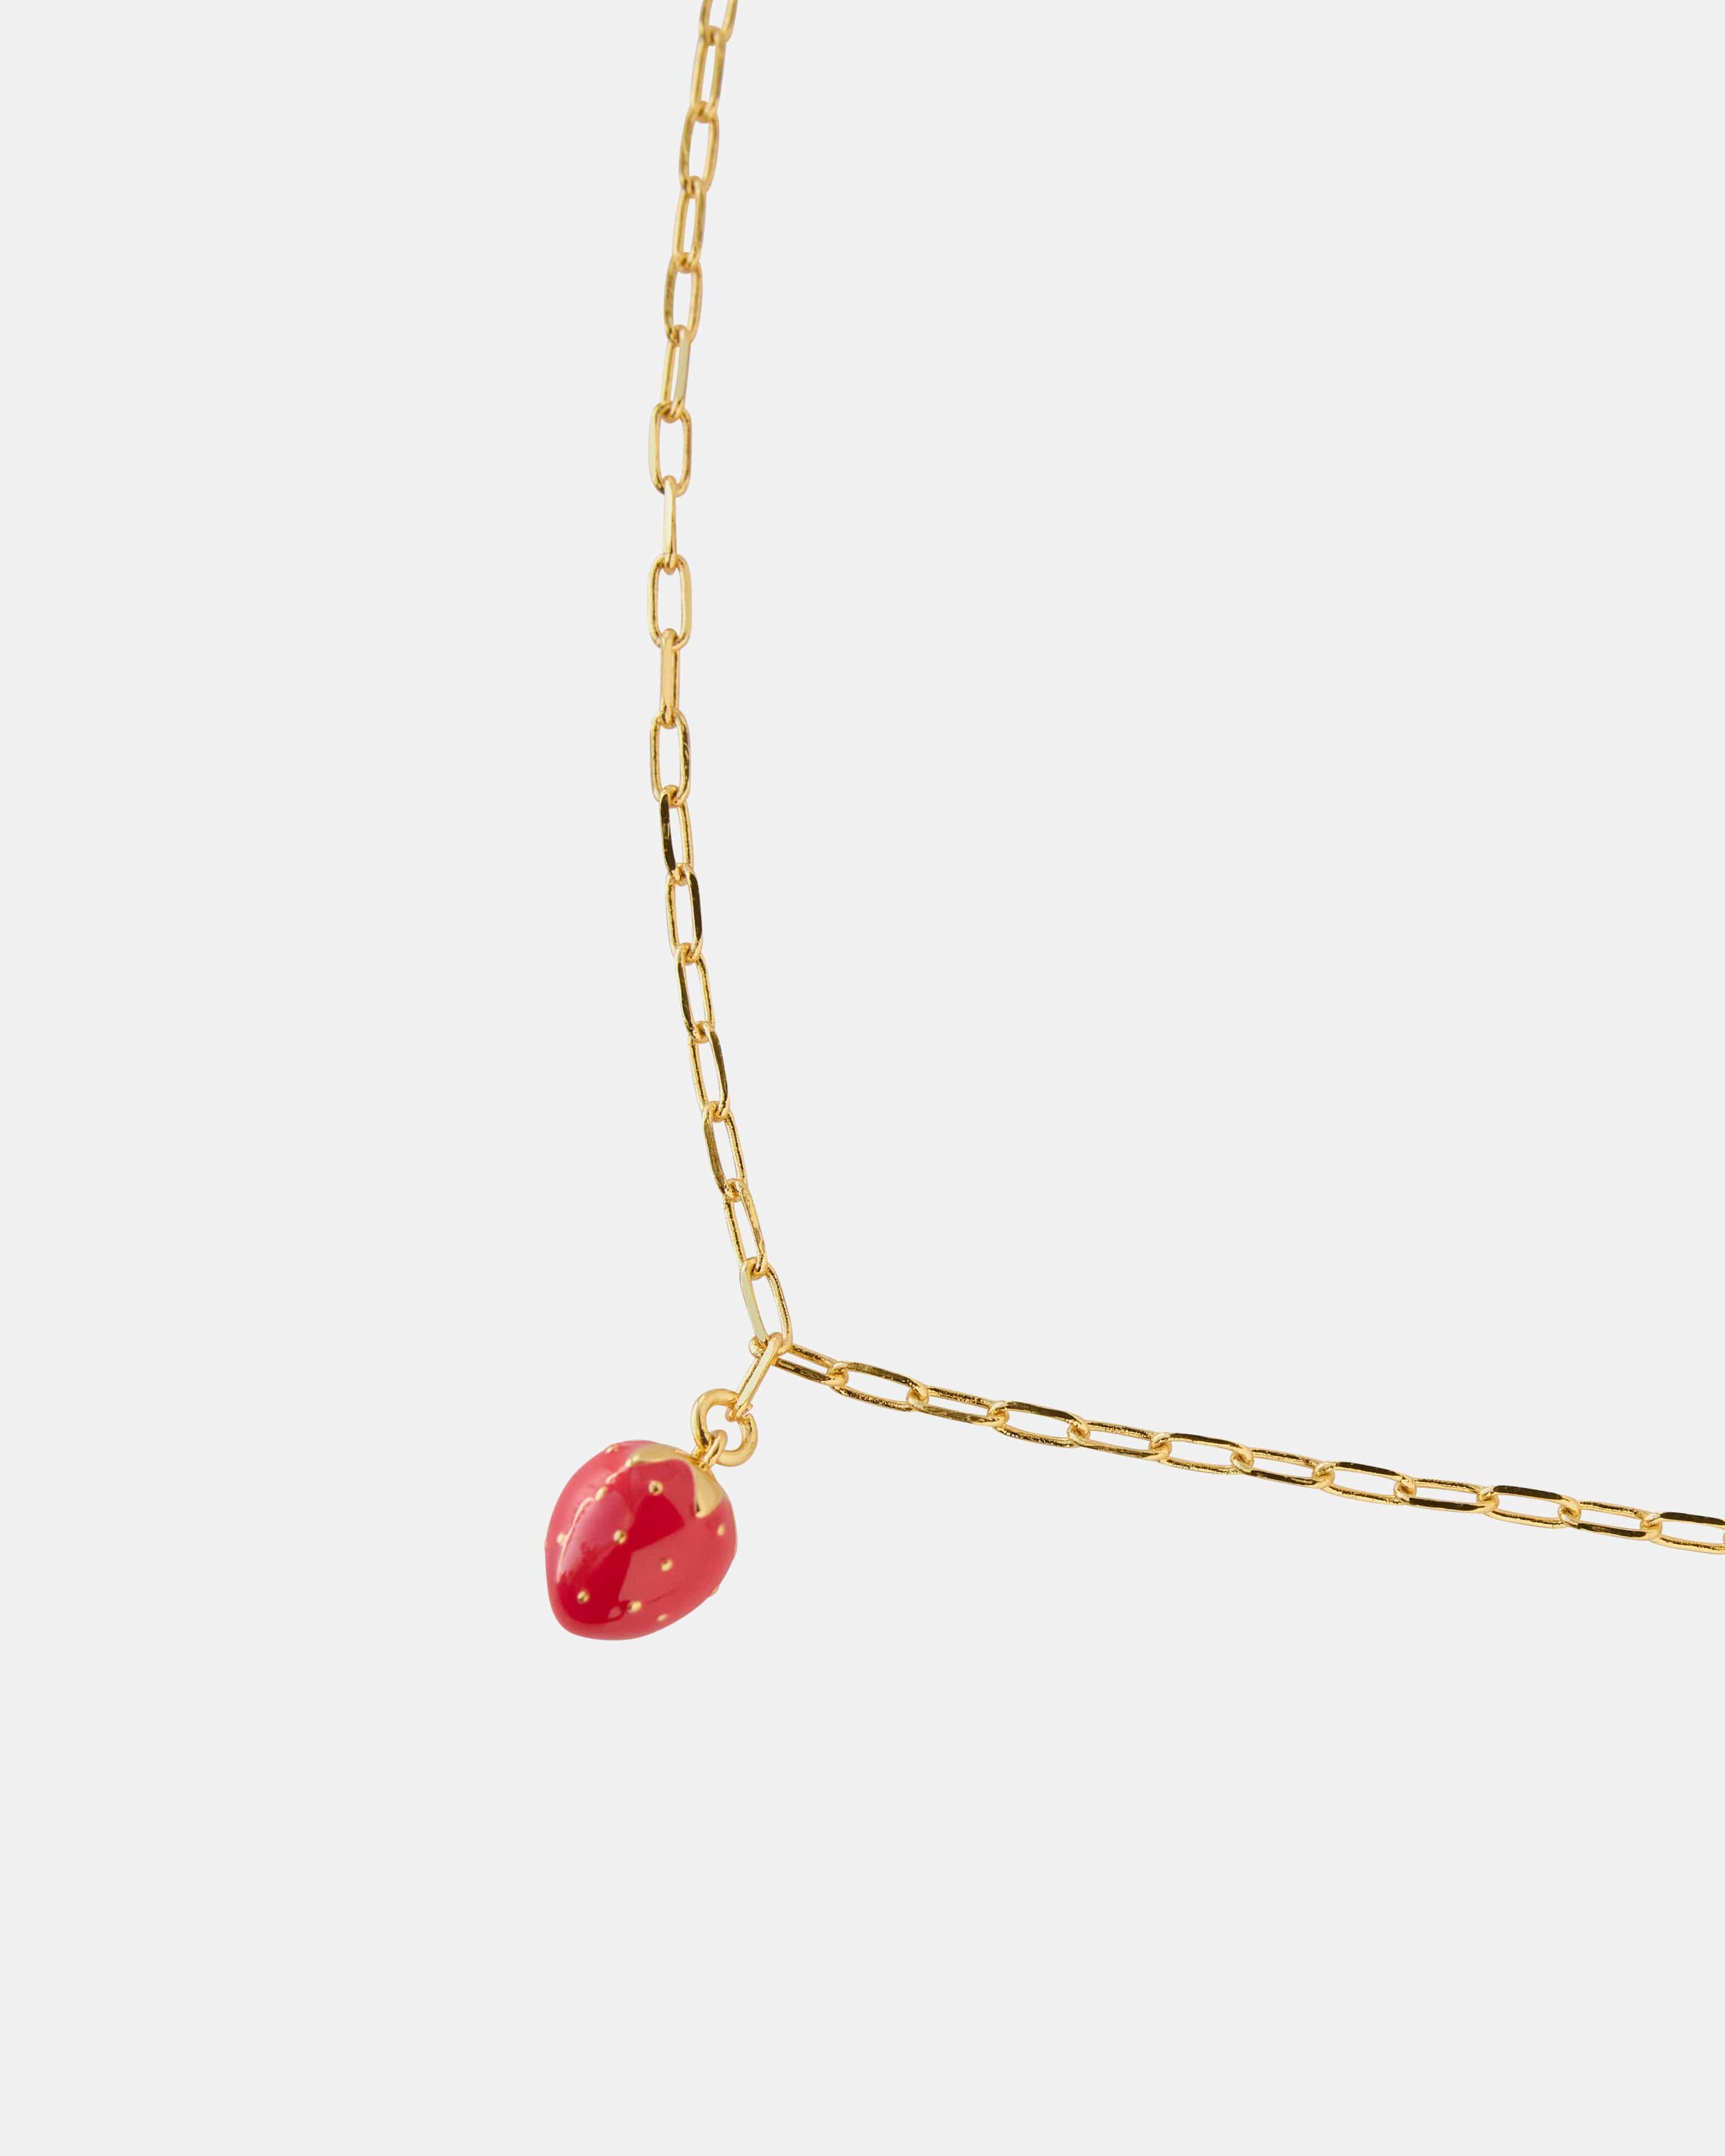 Gold necklace with a red strawberry charm.